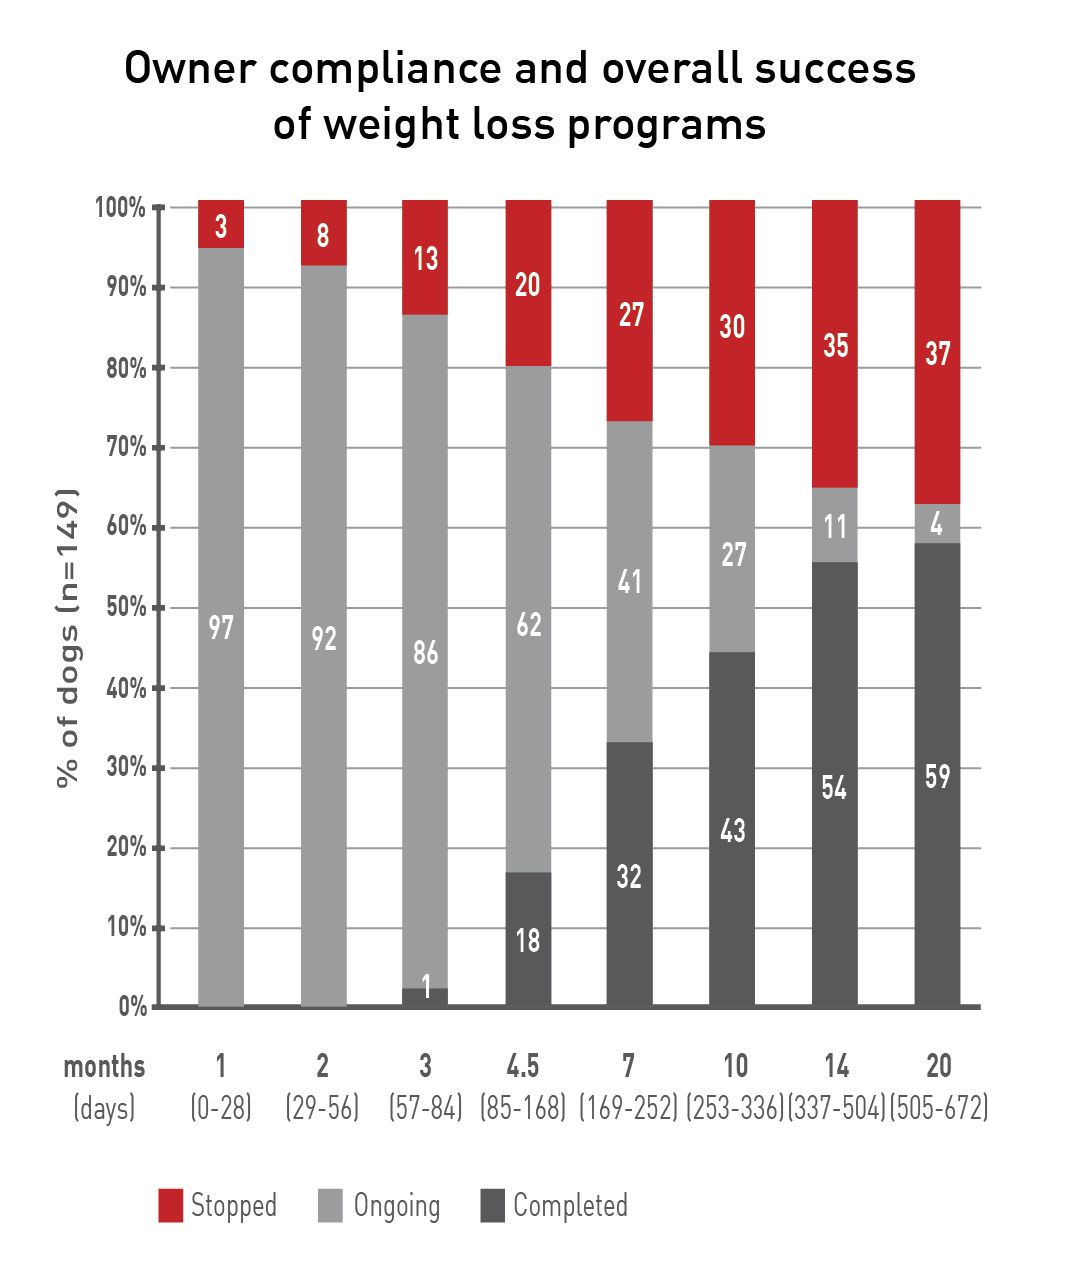 A bar chart showing owner compliance and overall success of a weight management program